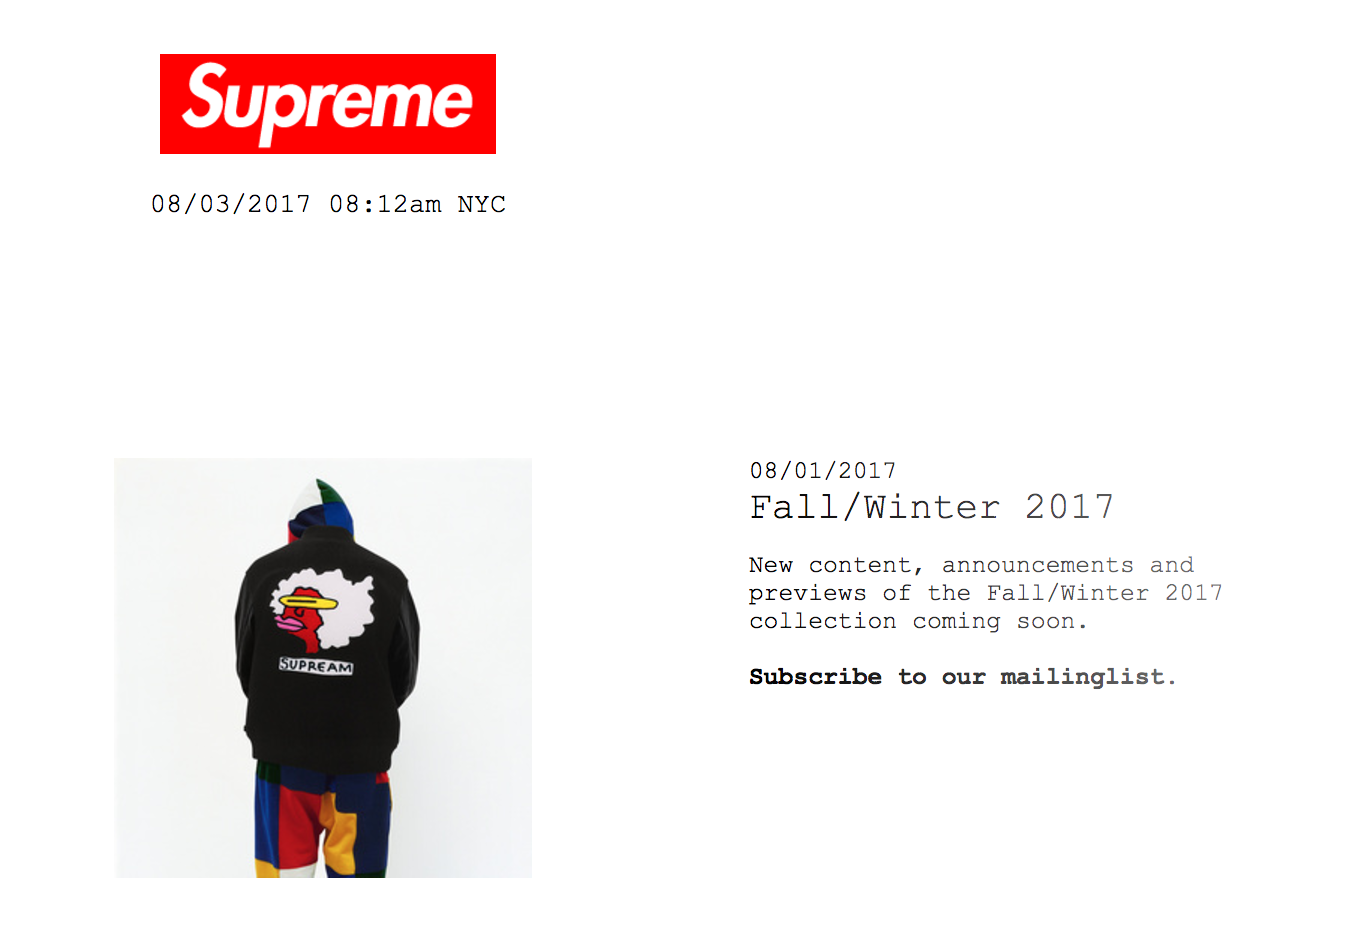 Screenshot of a product on Supreme